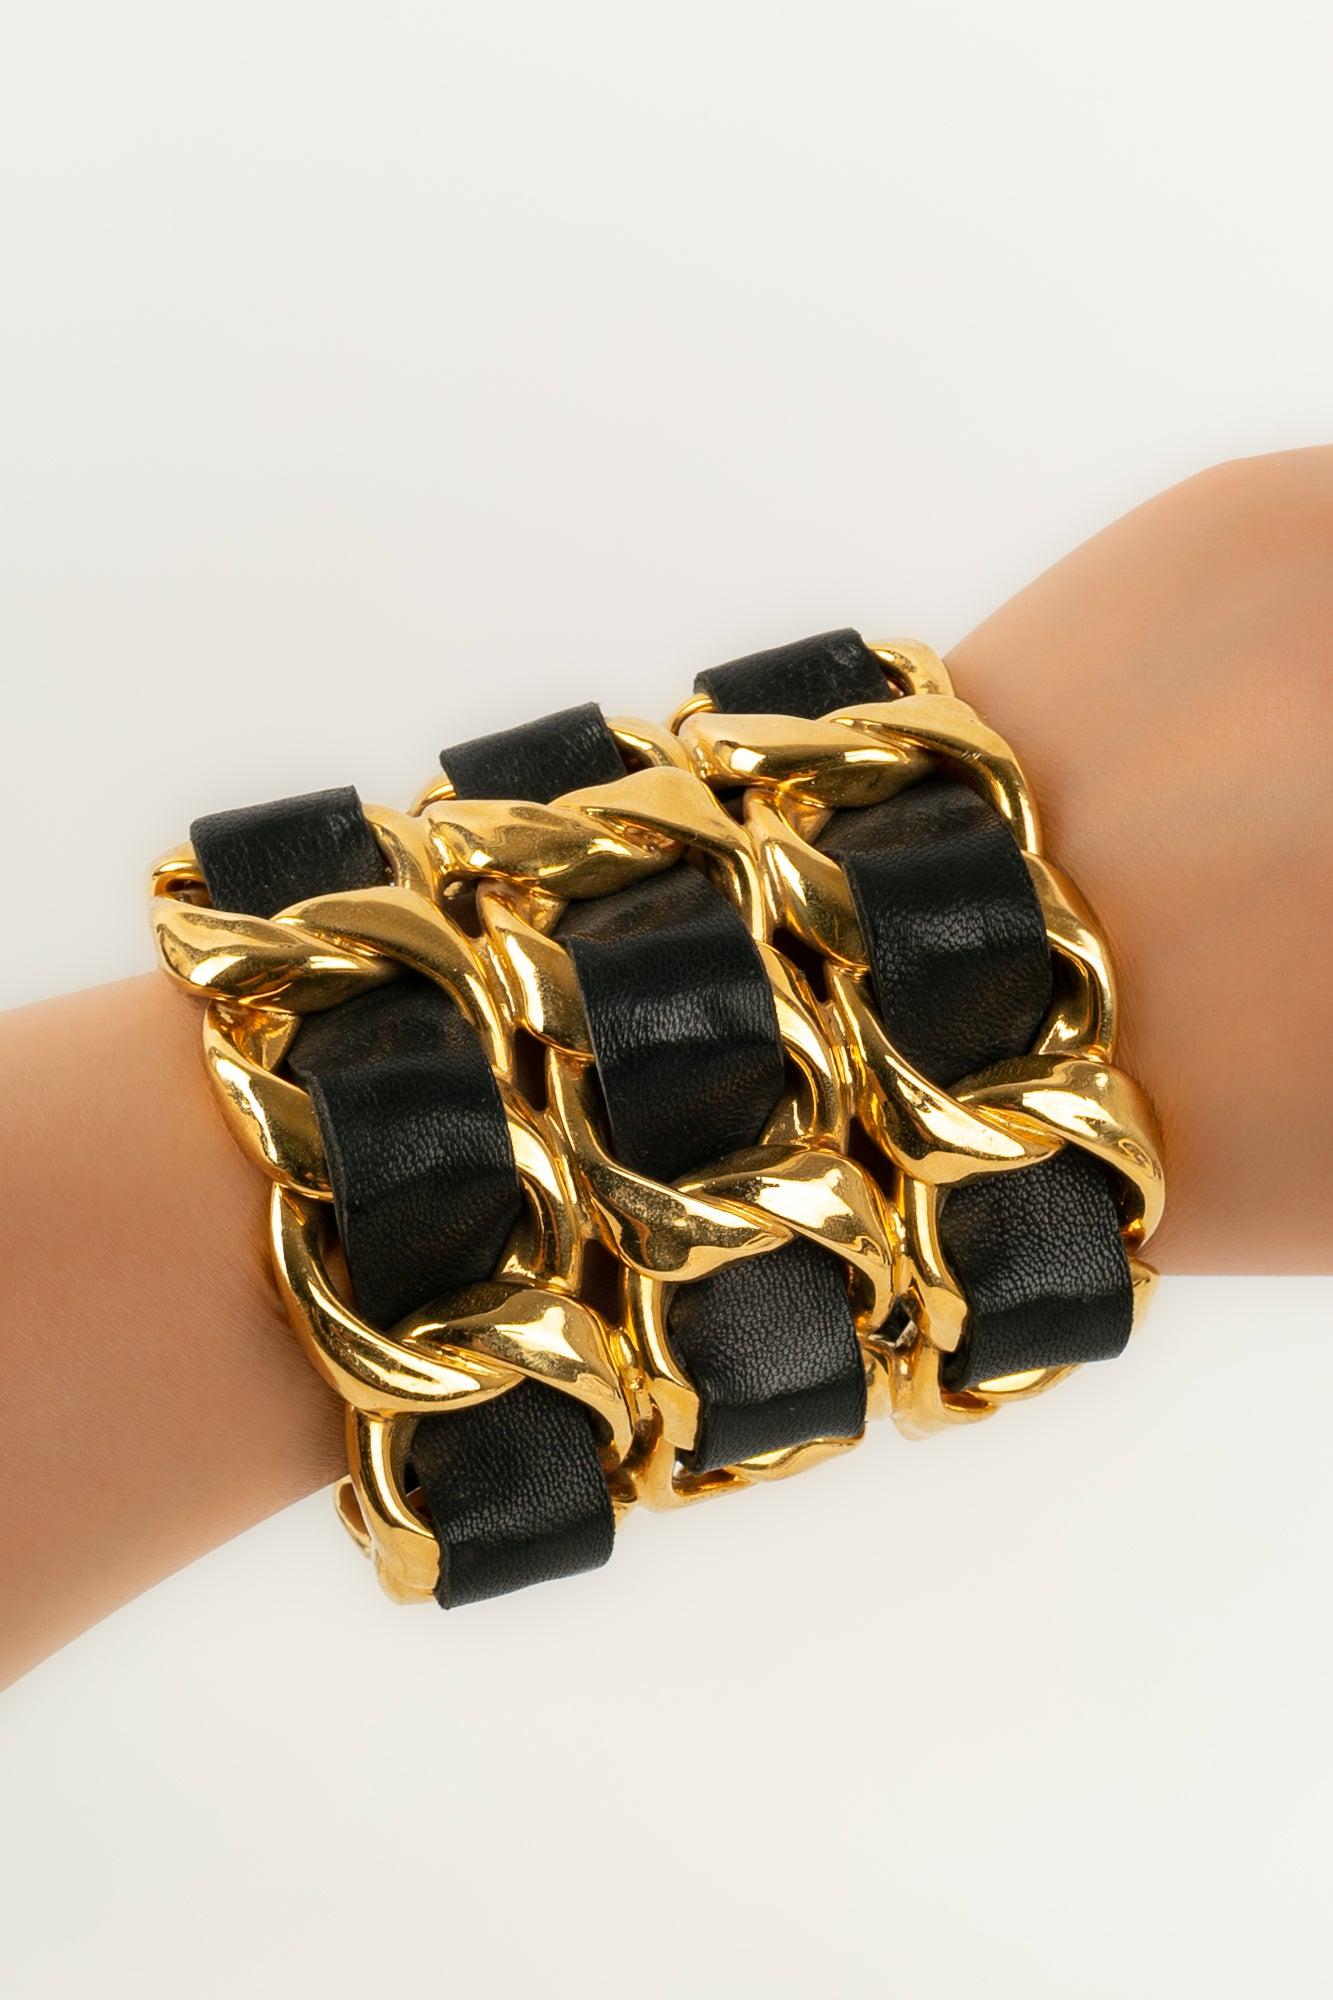 Chanel Cuff Bracelet in Golden Metal and Black Leather For Sale 4